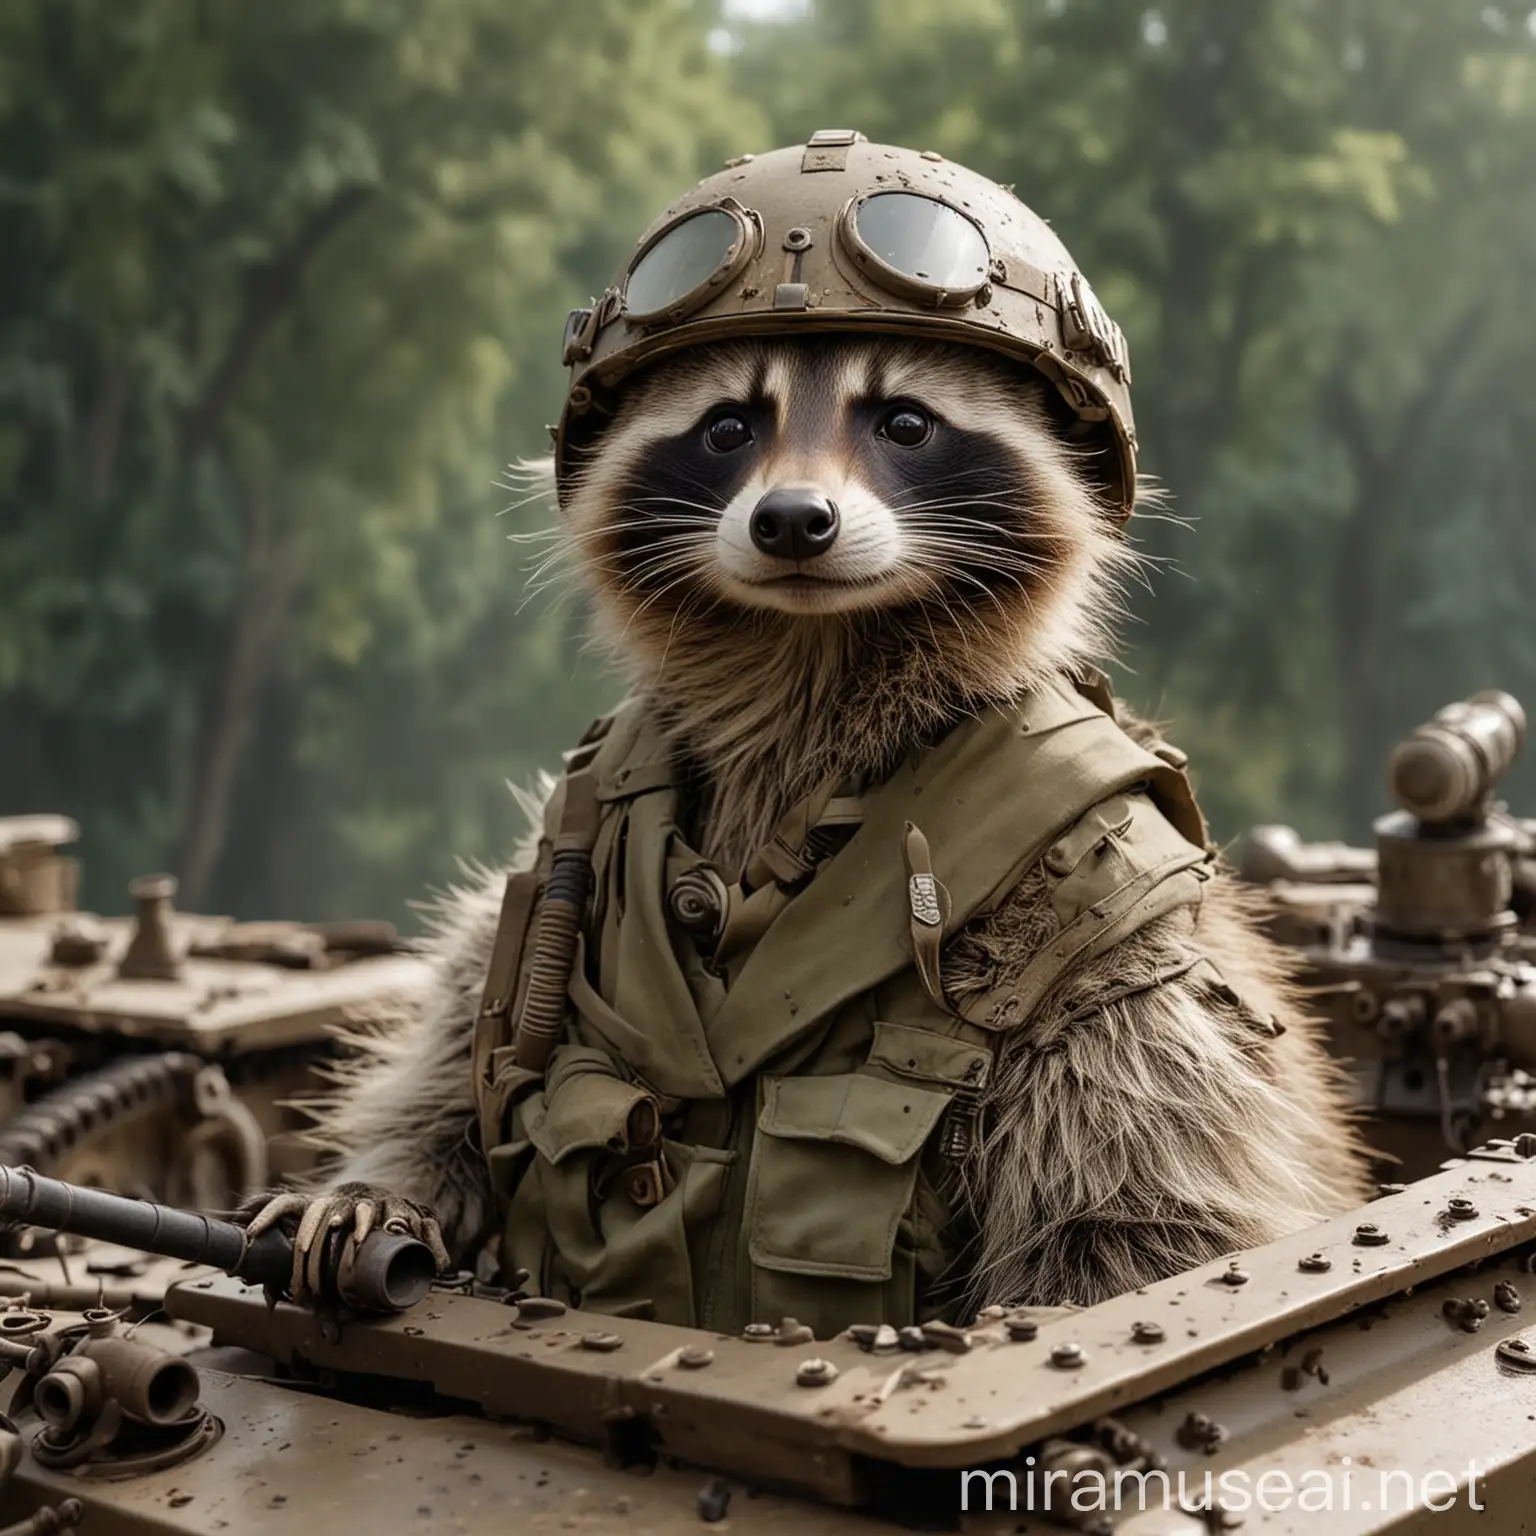 Raccoon army general in uniform on a tank with a helmet on world war 2